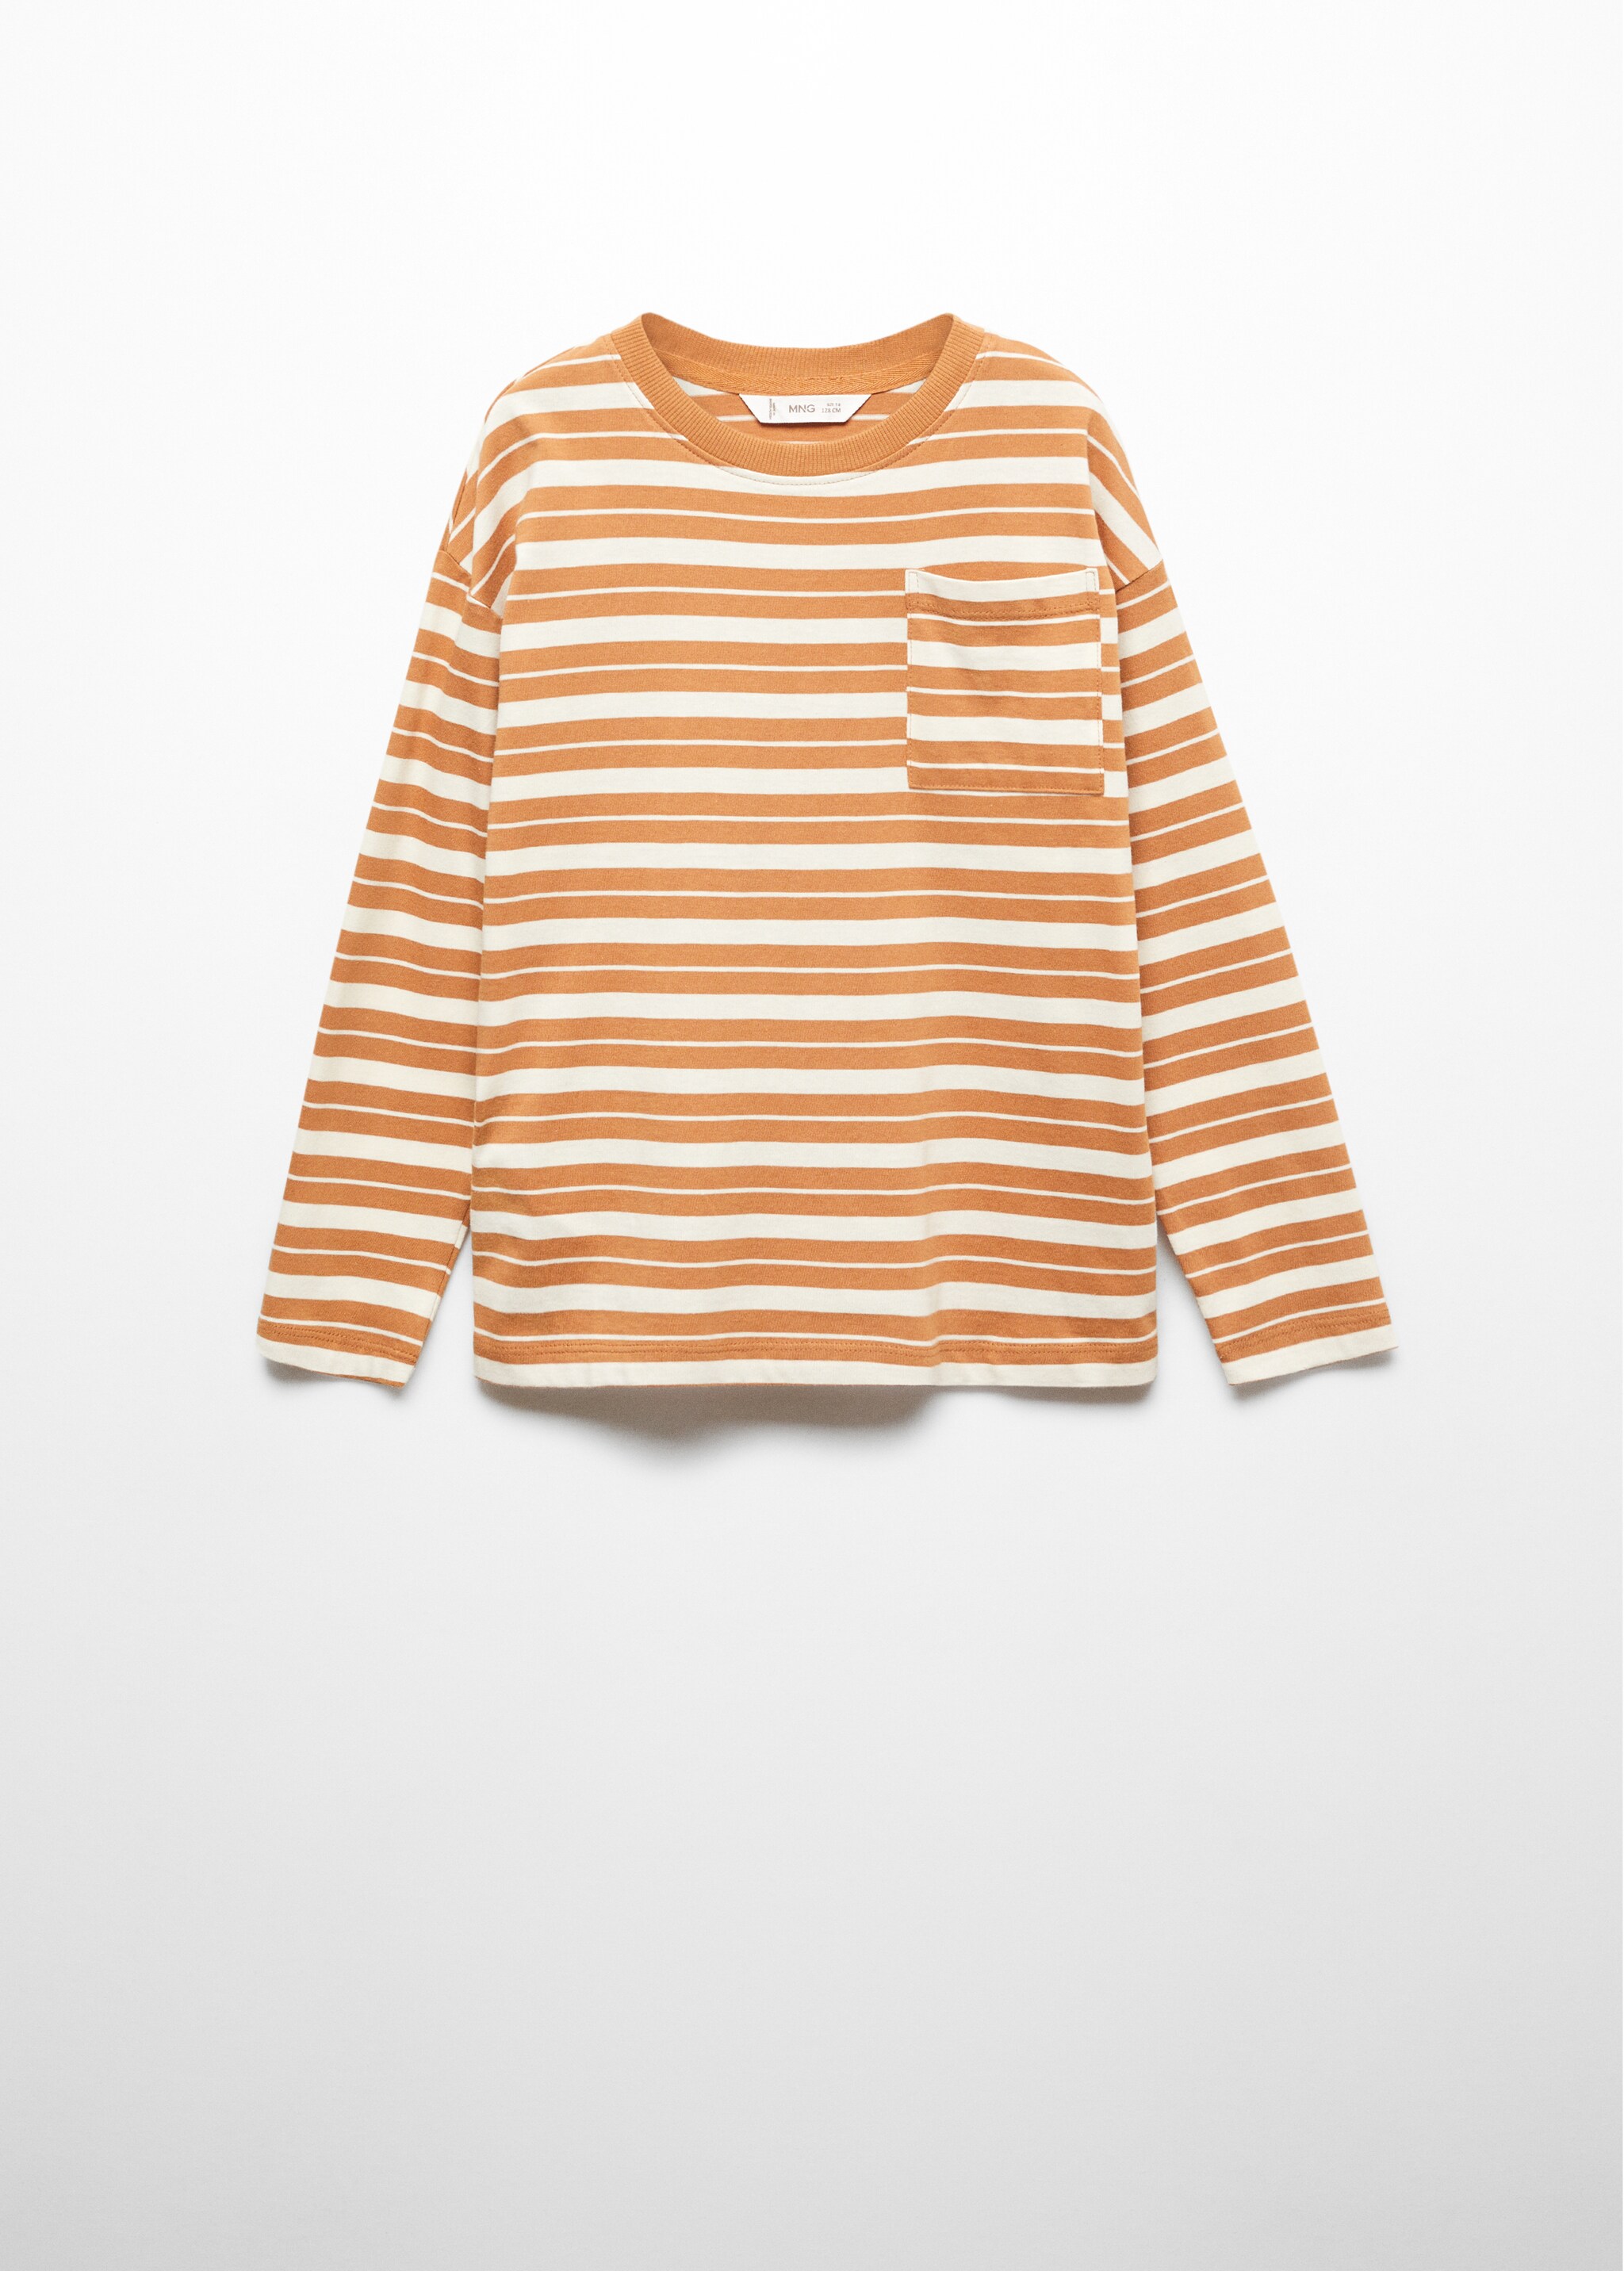 Striped long sleeves t-shirt - Article without model